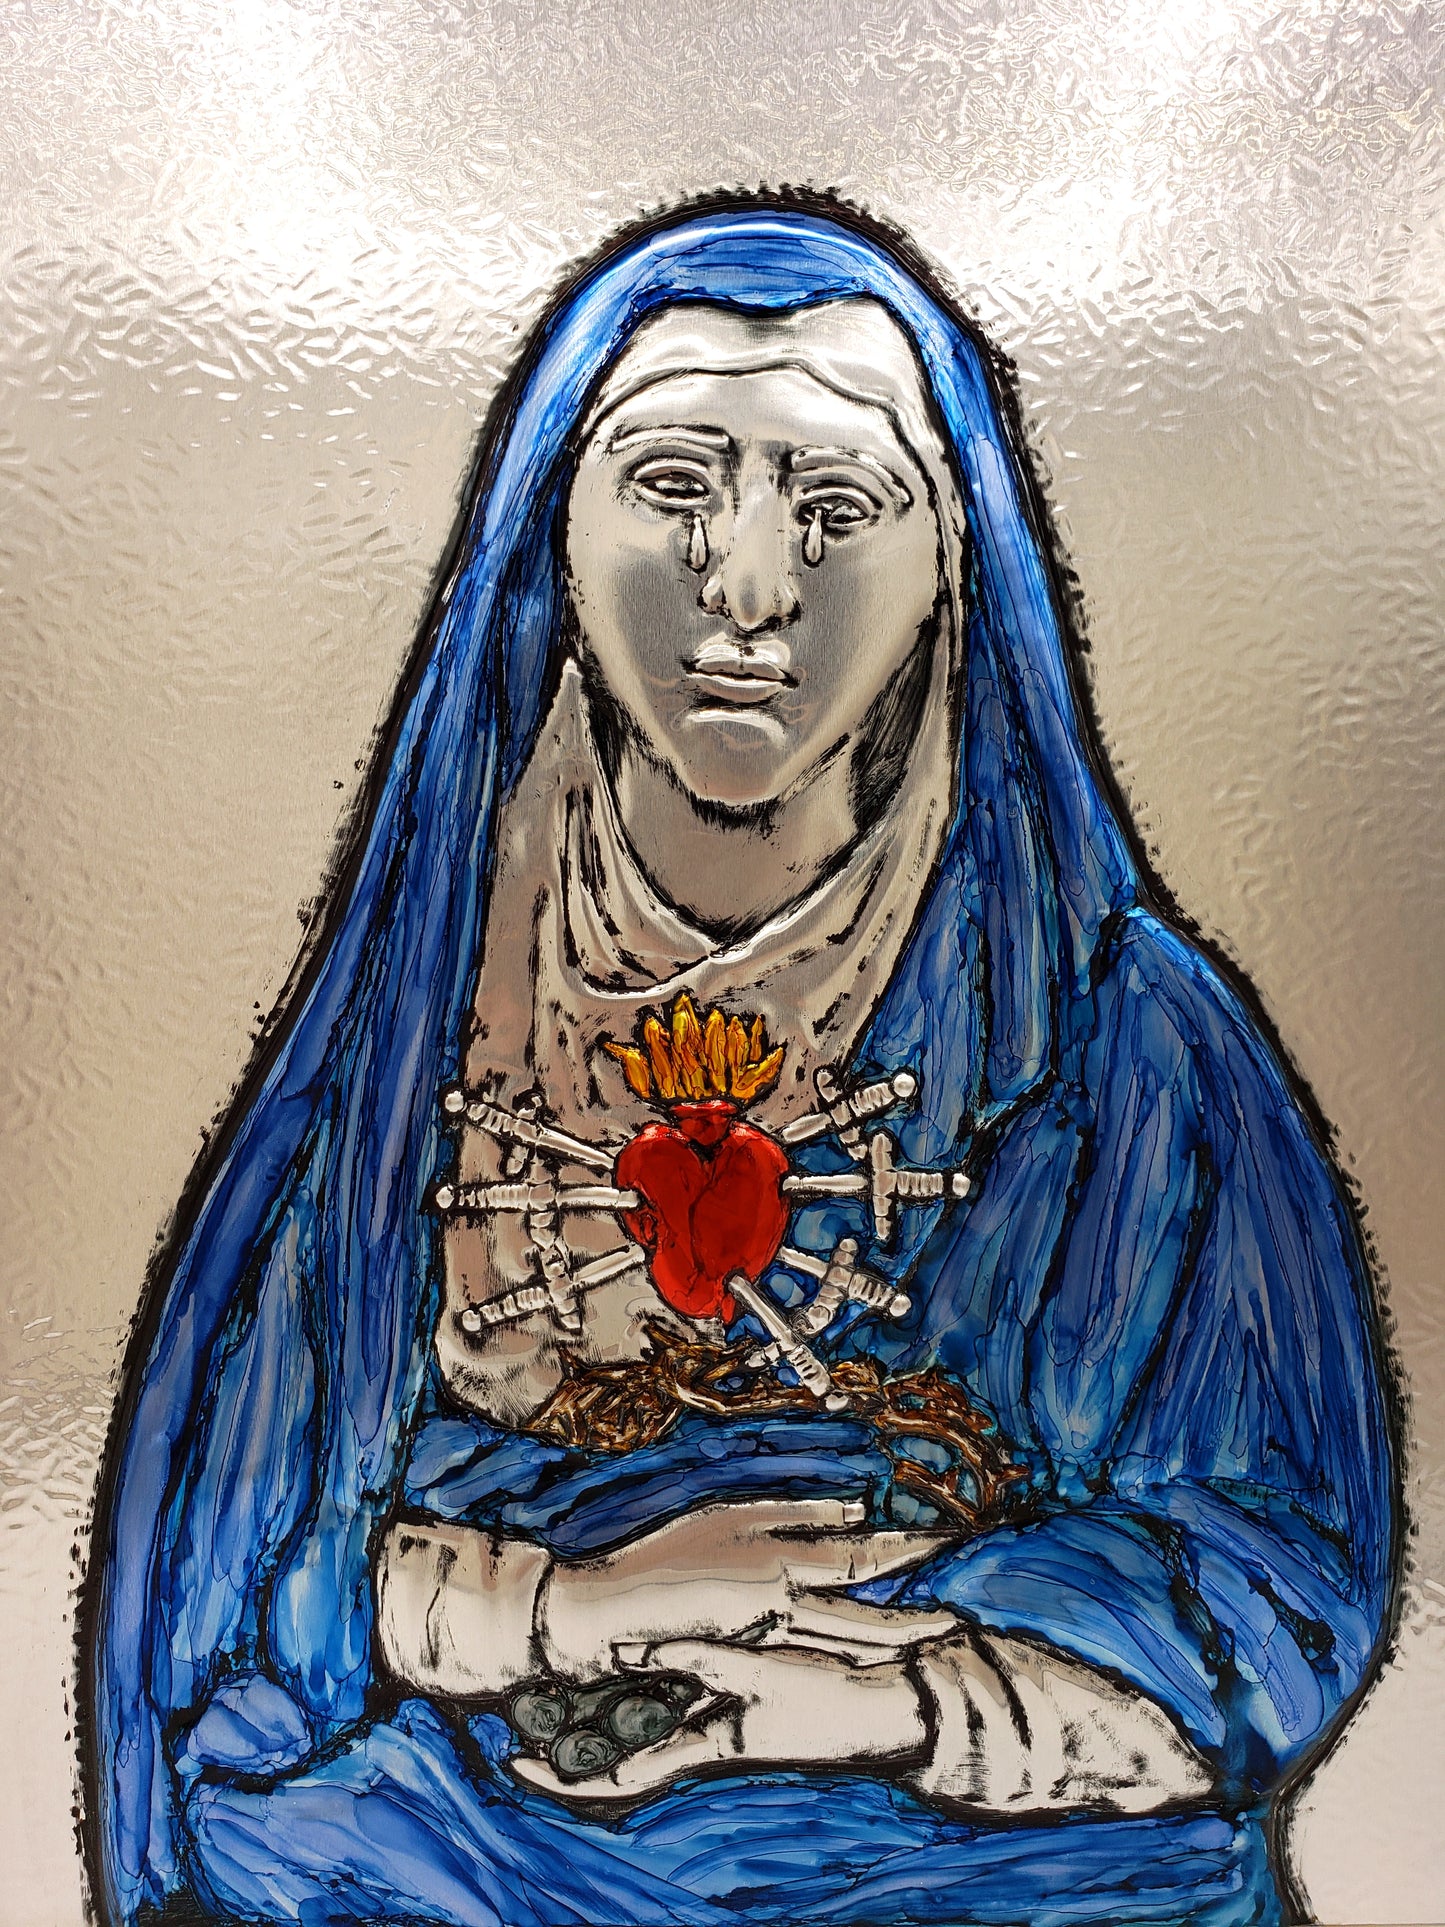 Our Lady of Sorrows - Artwork